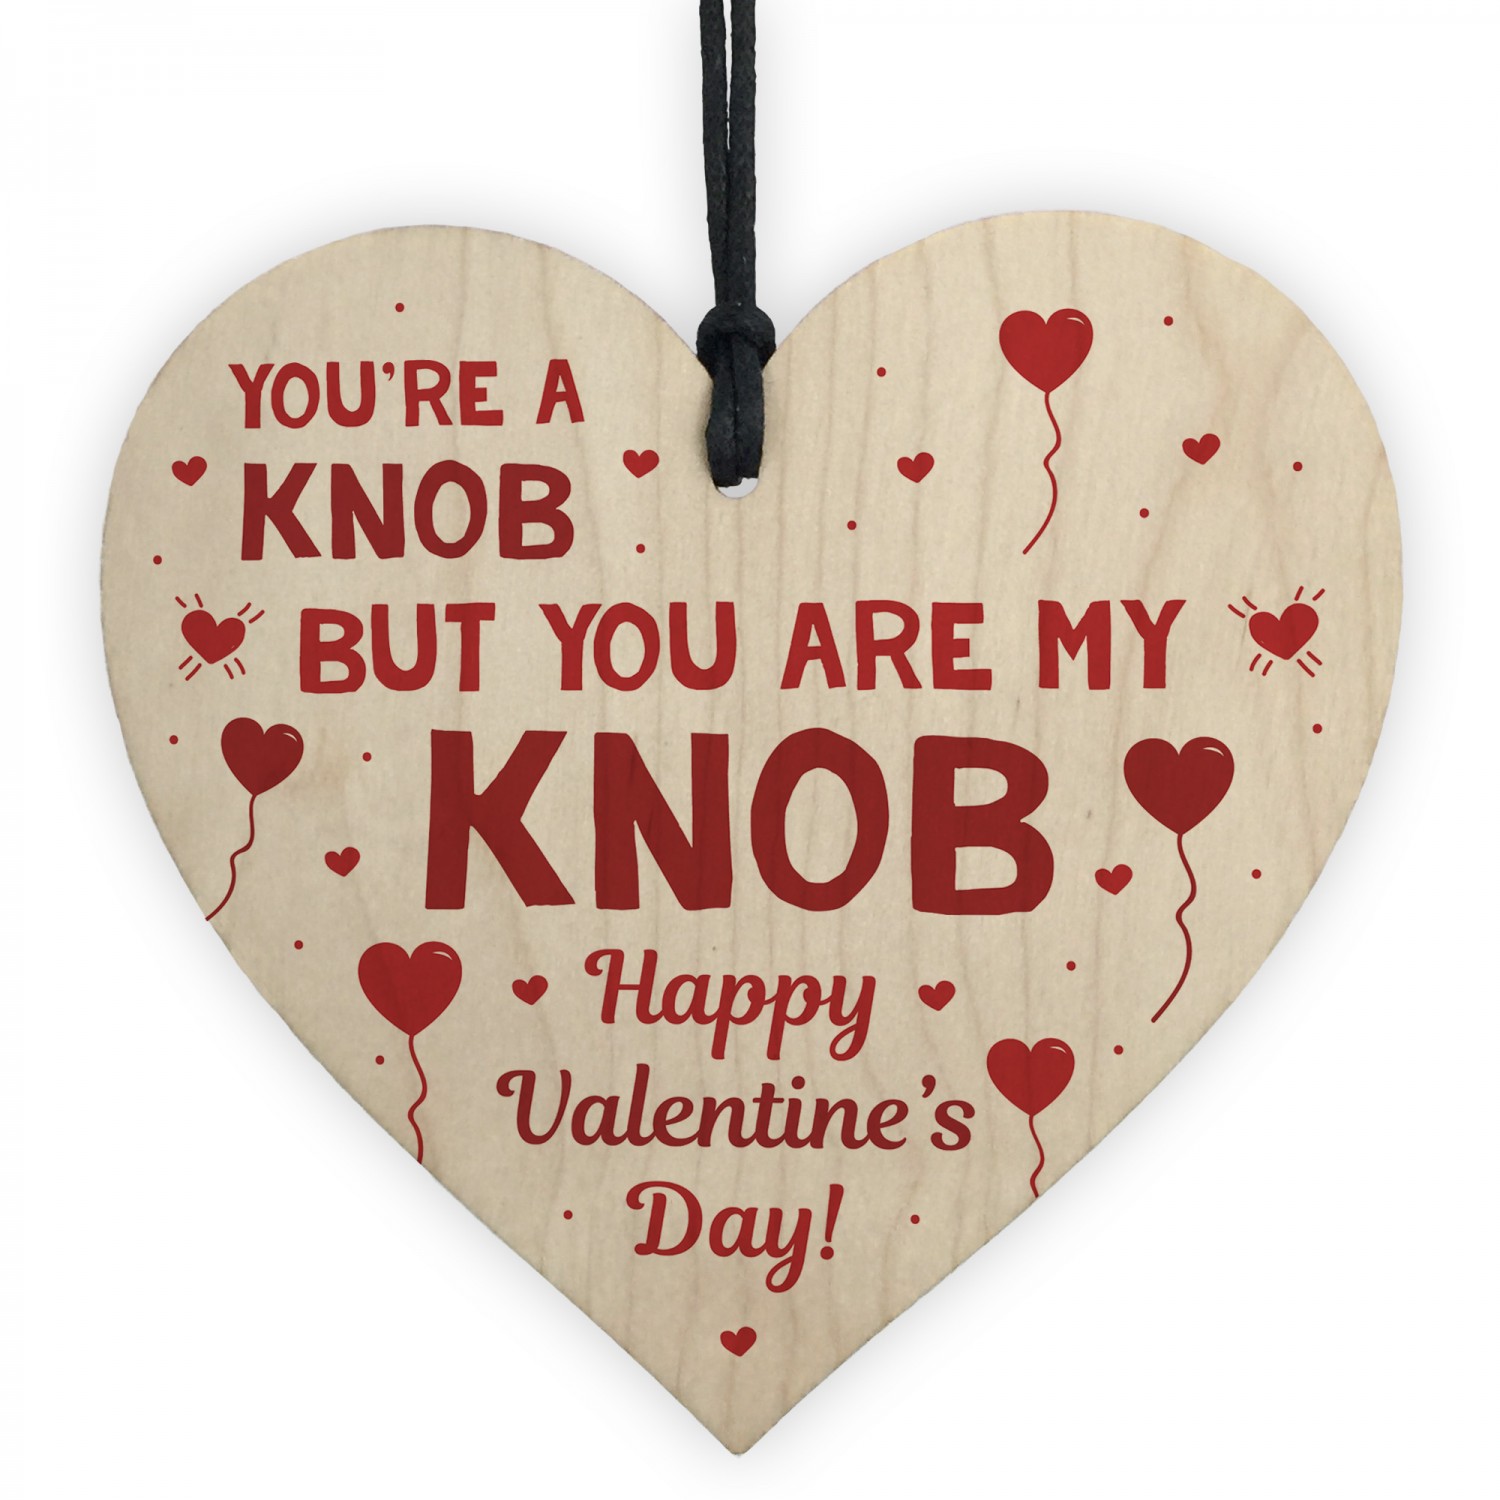 RED OCEAN Youre A Knob But Youre My Knob Novelty Wooden Hanging Heart Valentines Gift For Him Husband Boyfriend Present 